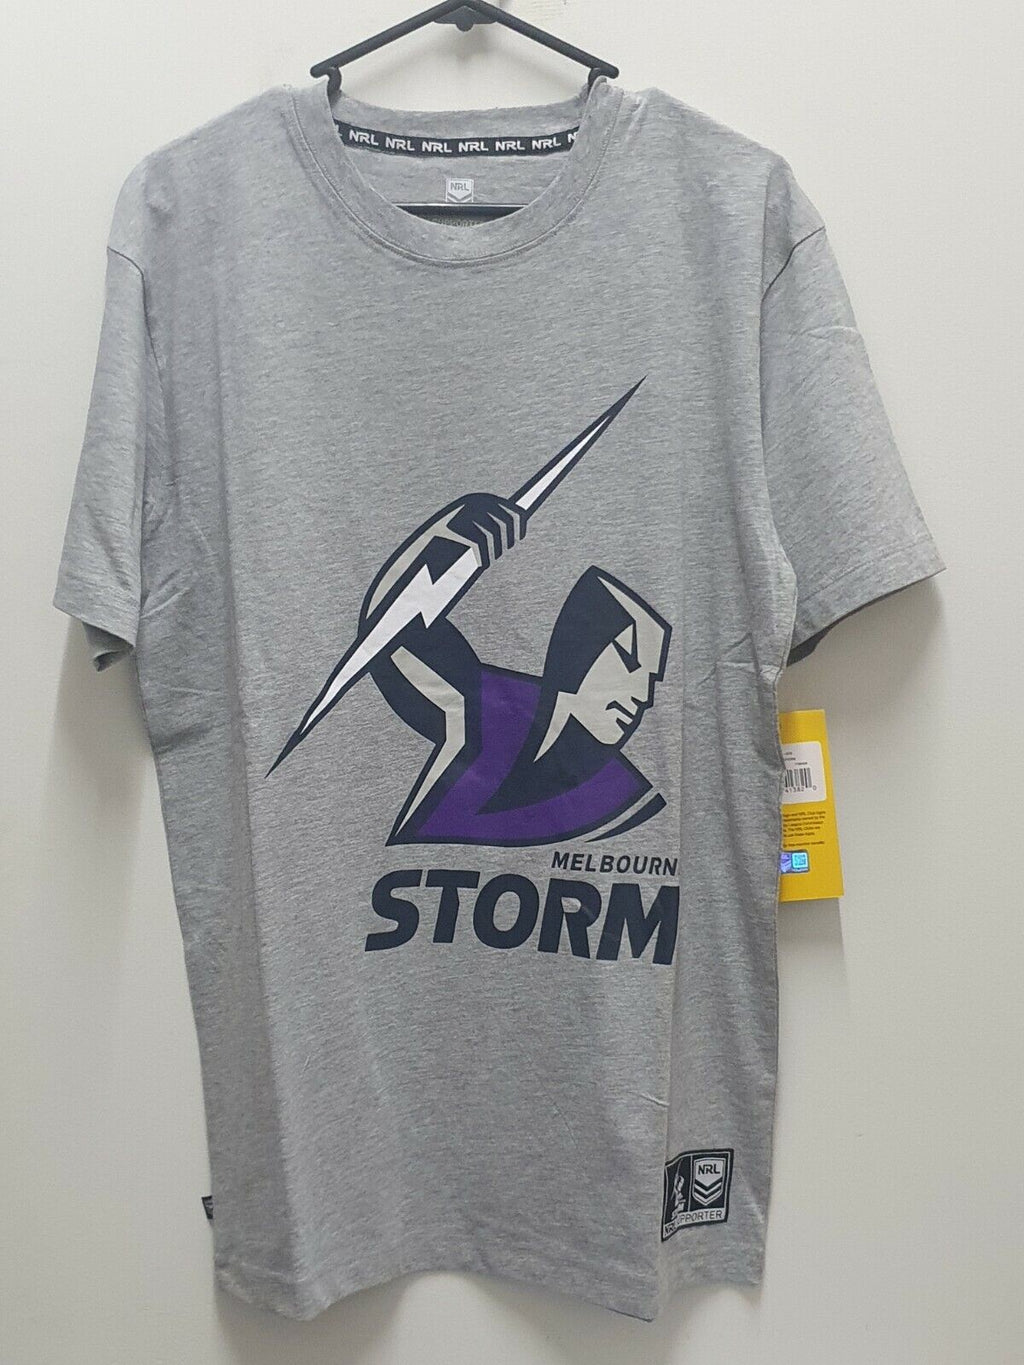 Melbourne Storm Supporter Tee